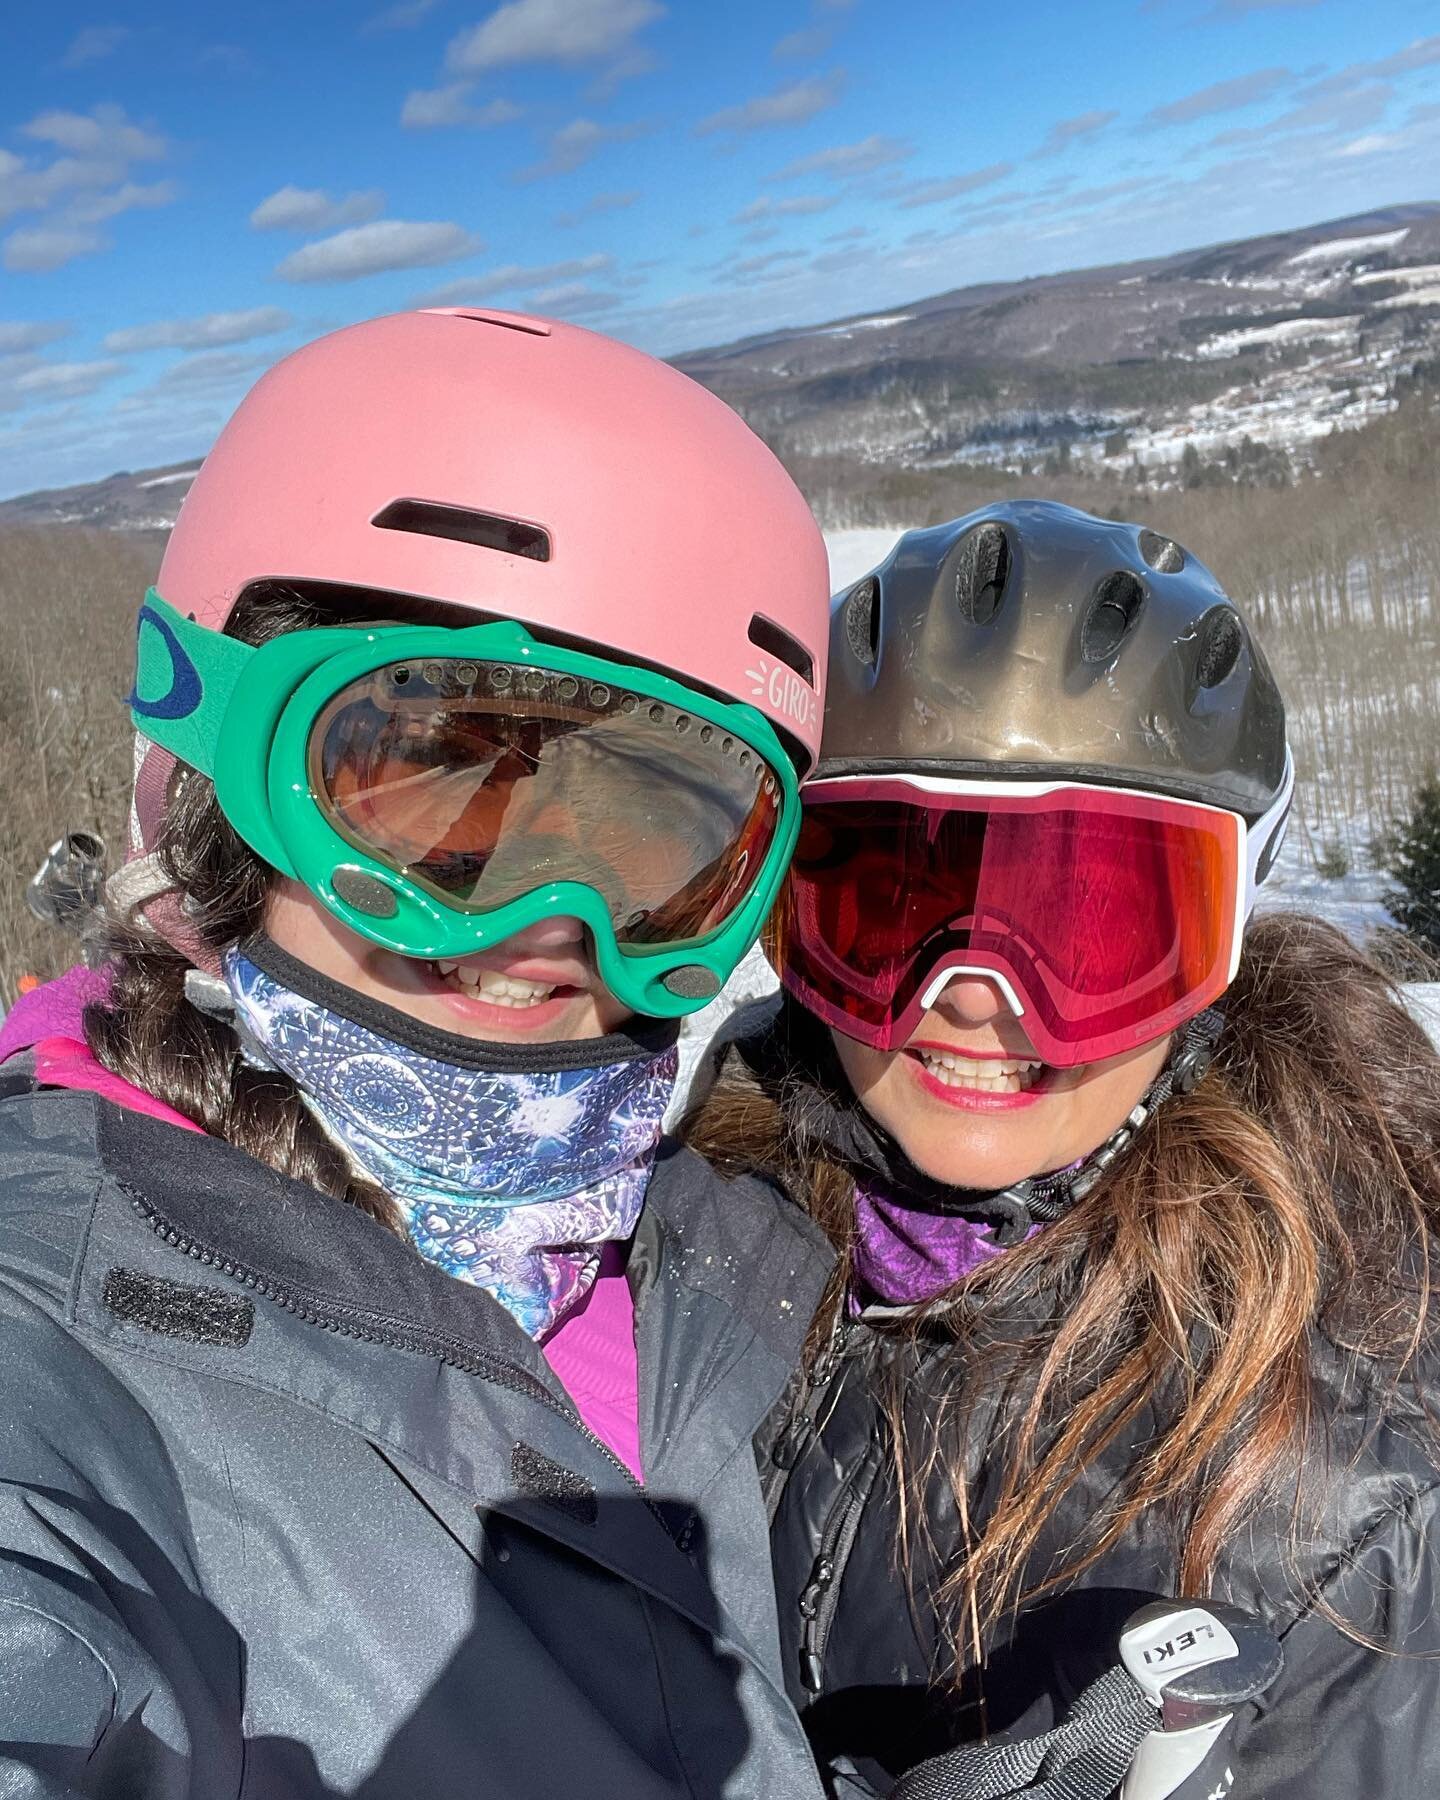 Dedicating International Women&rsquo;s Day to my daughters who inherit a legacy of trying to summit big mountains. ⛰️⛰️

I taught my older one to ski @strattonresort when she was 3 years old. And if I hadn&rsquo;t been with an excellent skier who is 